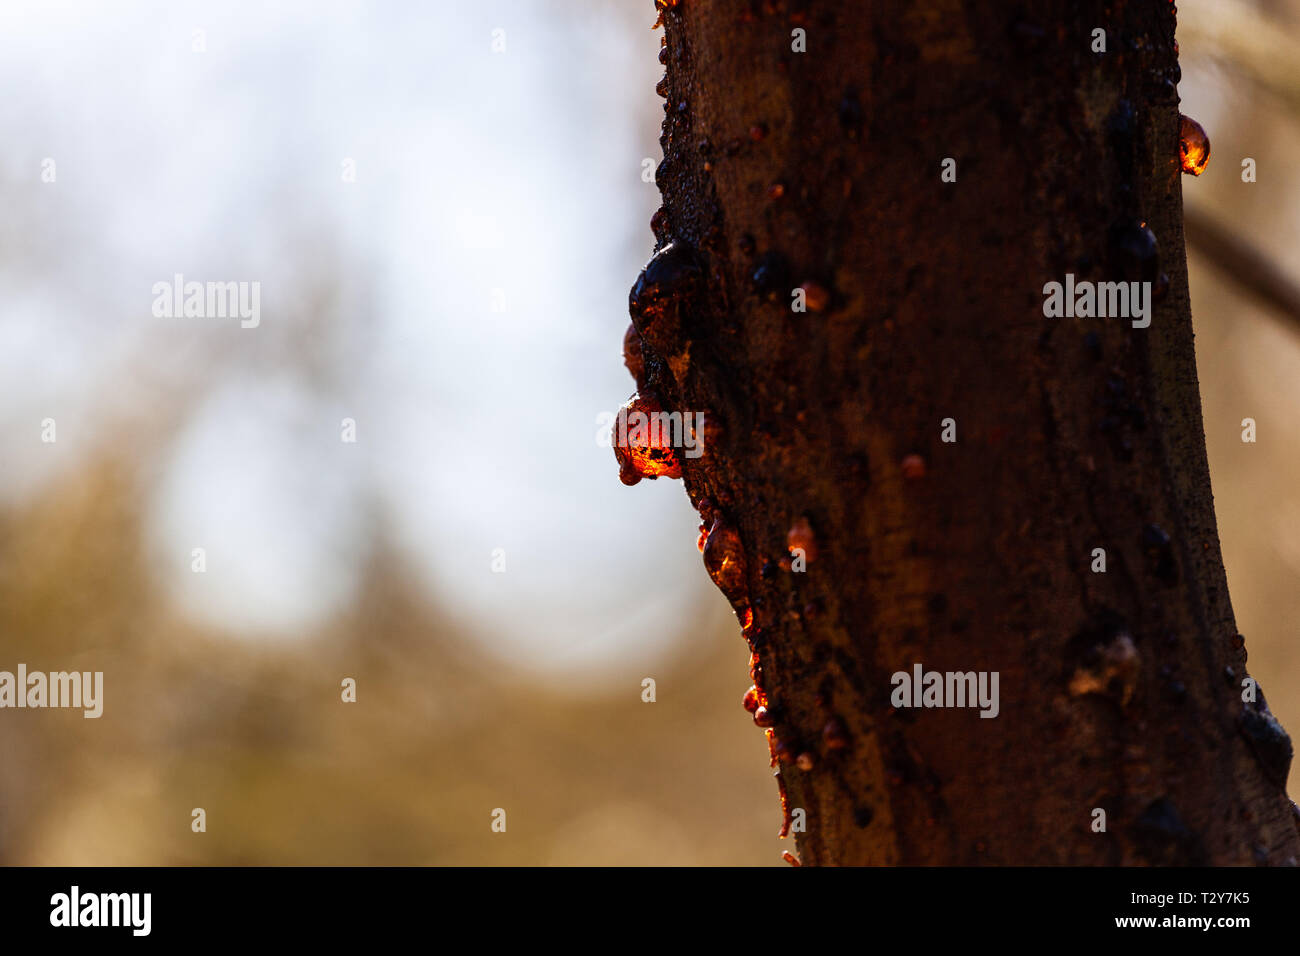 Gum tree sap glowing in the sun on blurred background with copy space Stock Photo